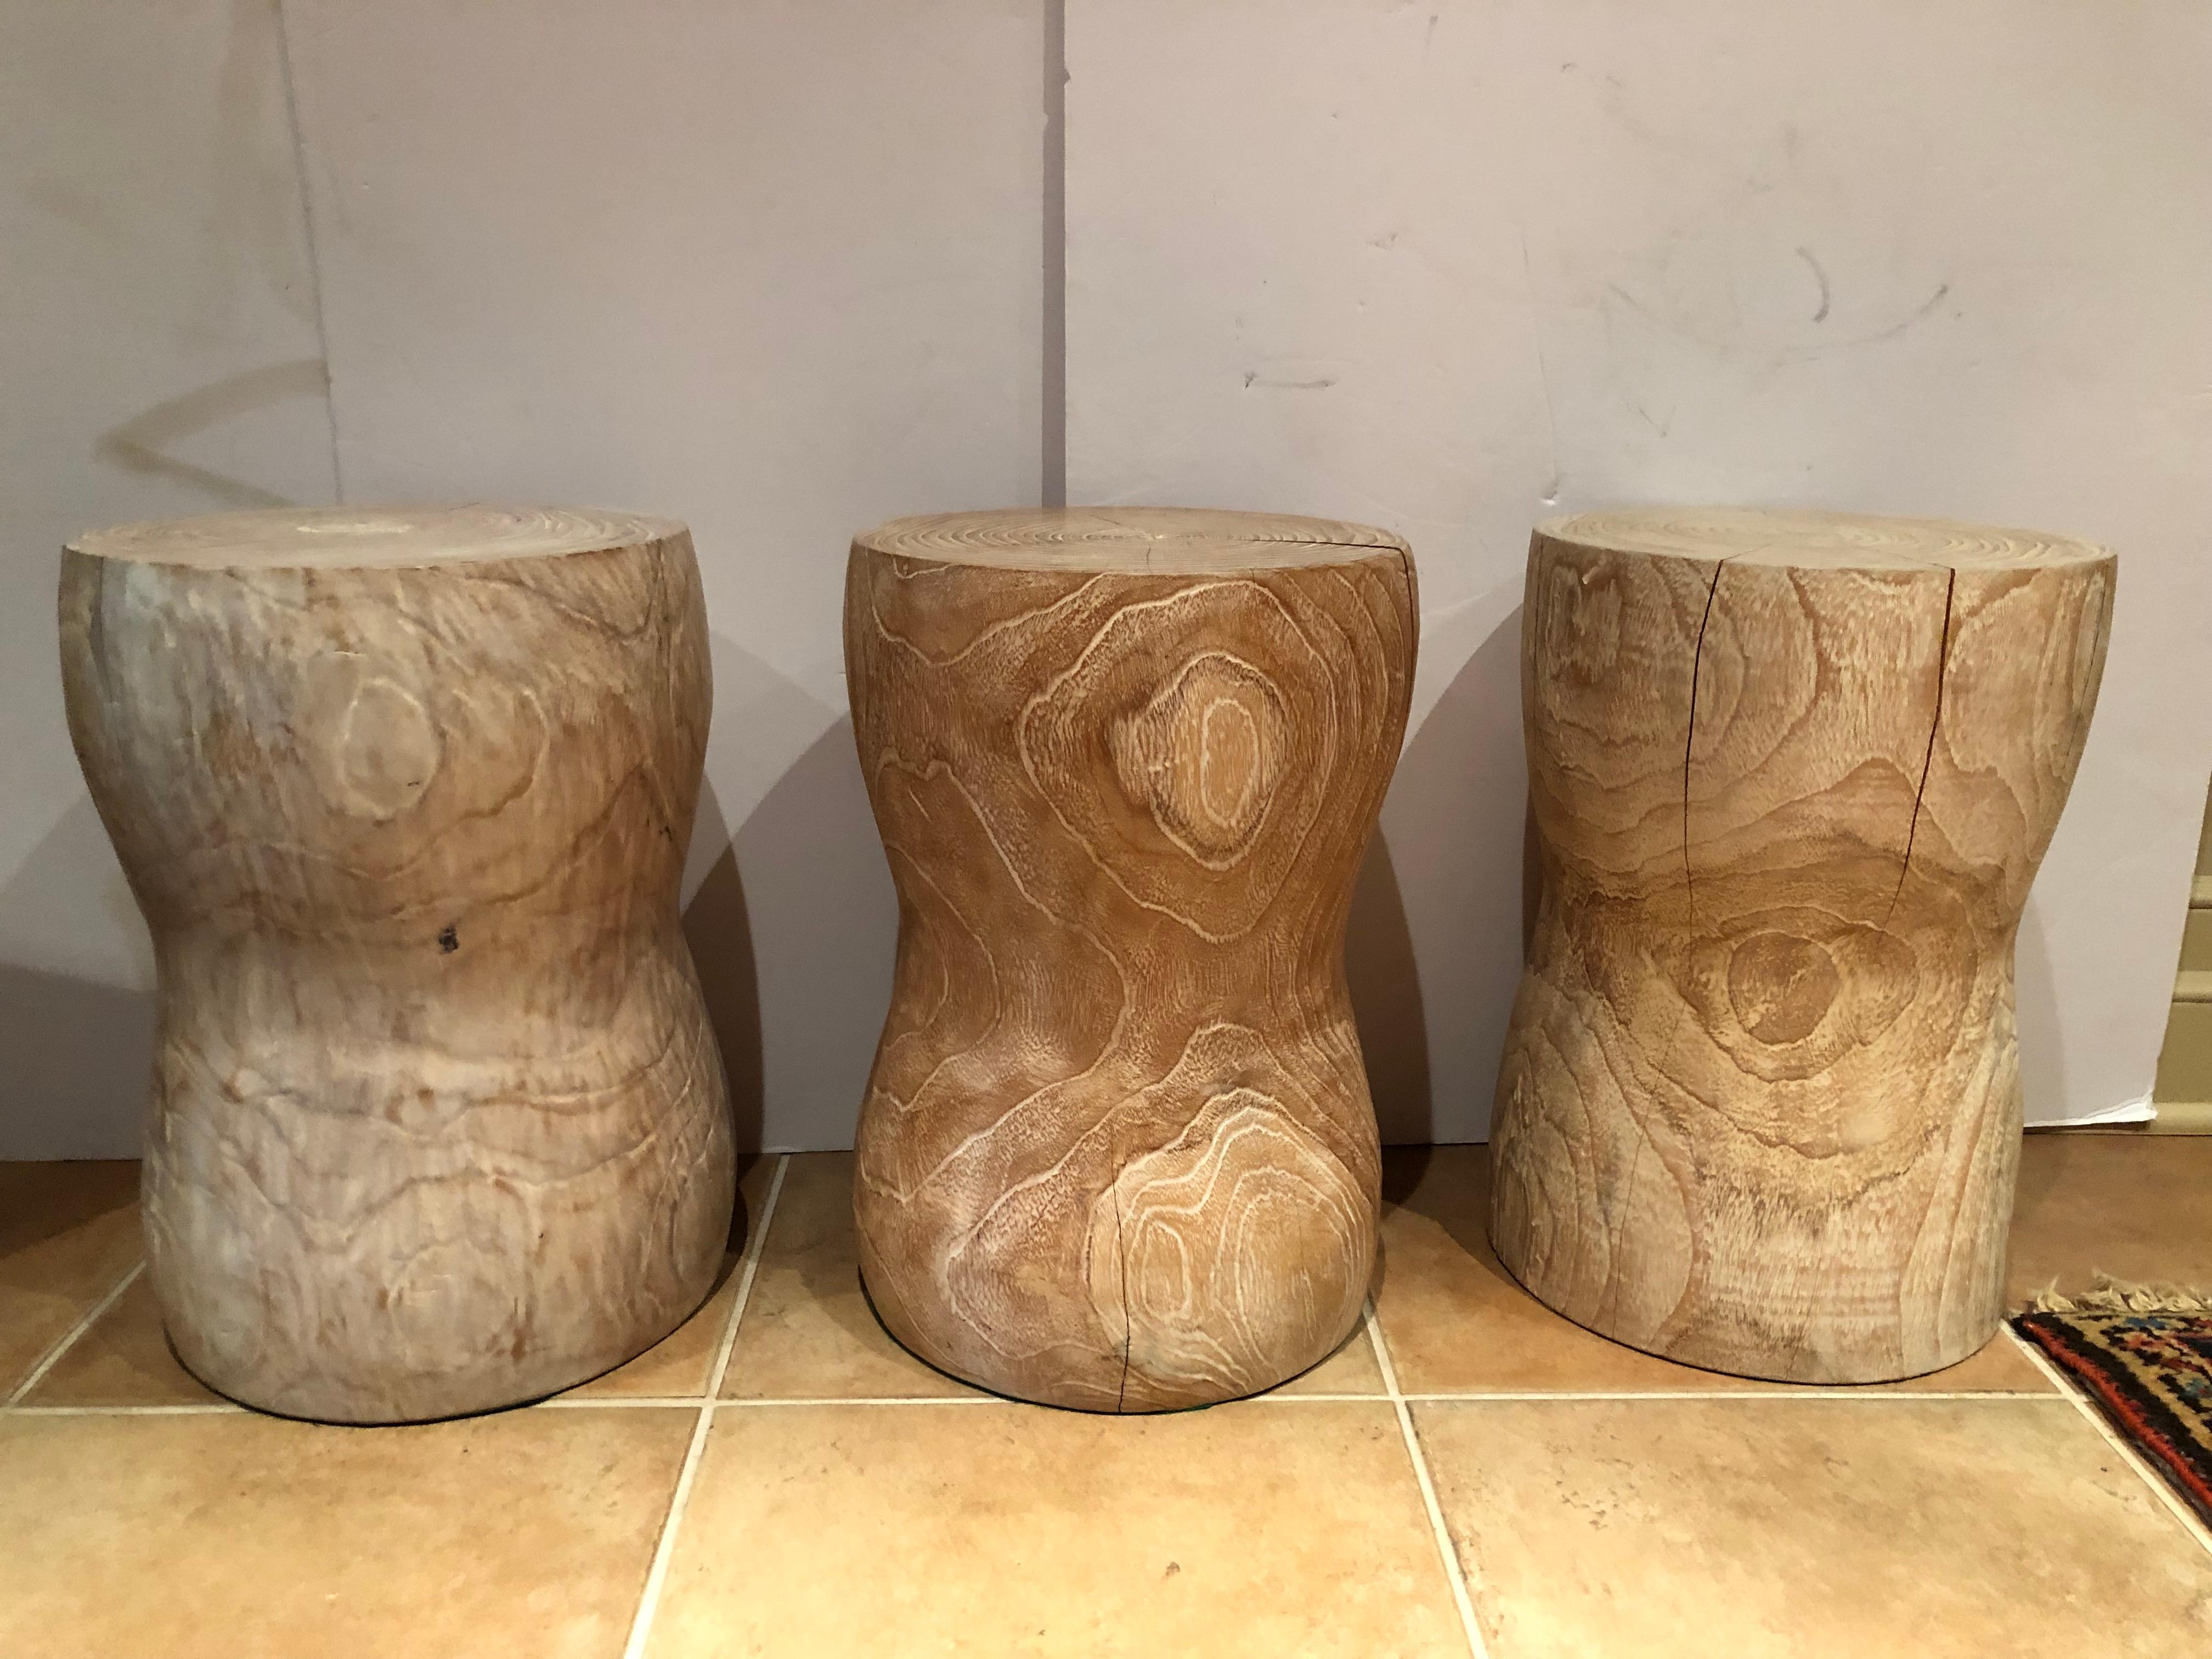 Very cool set of three corseted stools in limed cerused oak. Stools are made of solid oak with natural crevices in the wood which add character and do not compromise their sturdiness. These are one-of-a-kind and great to give a room an organic and